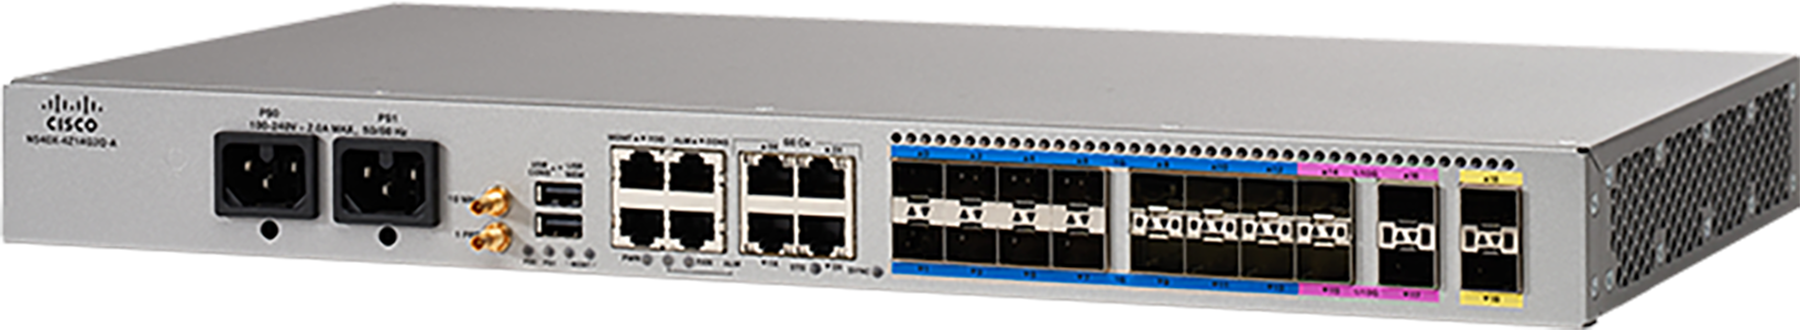 Cisco Network Convergence System 540 Small Density Routers Data Sheet -  Cisco